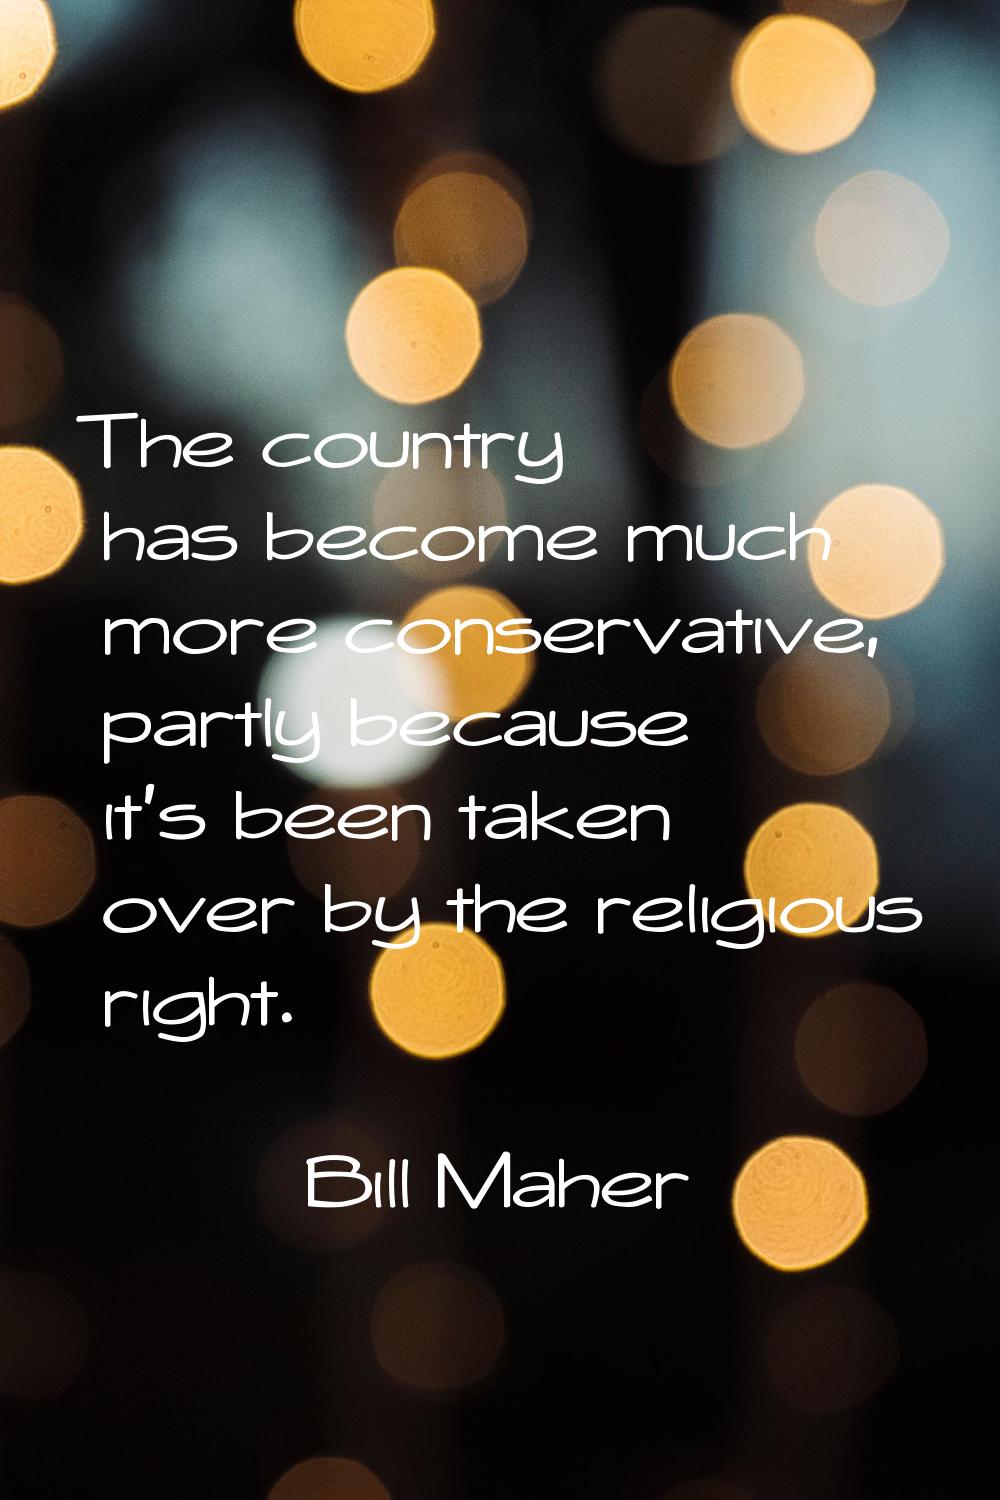 The country has become much more conservative, partly because it's been taken over by the religious